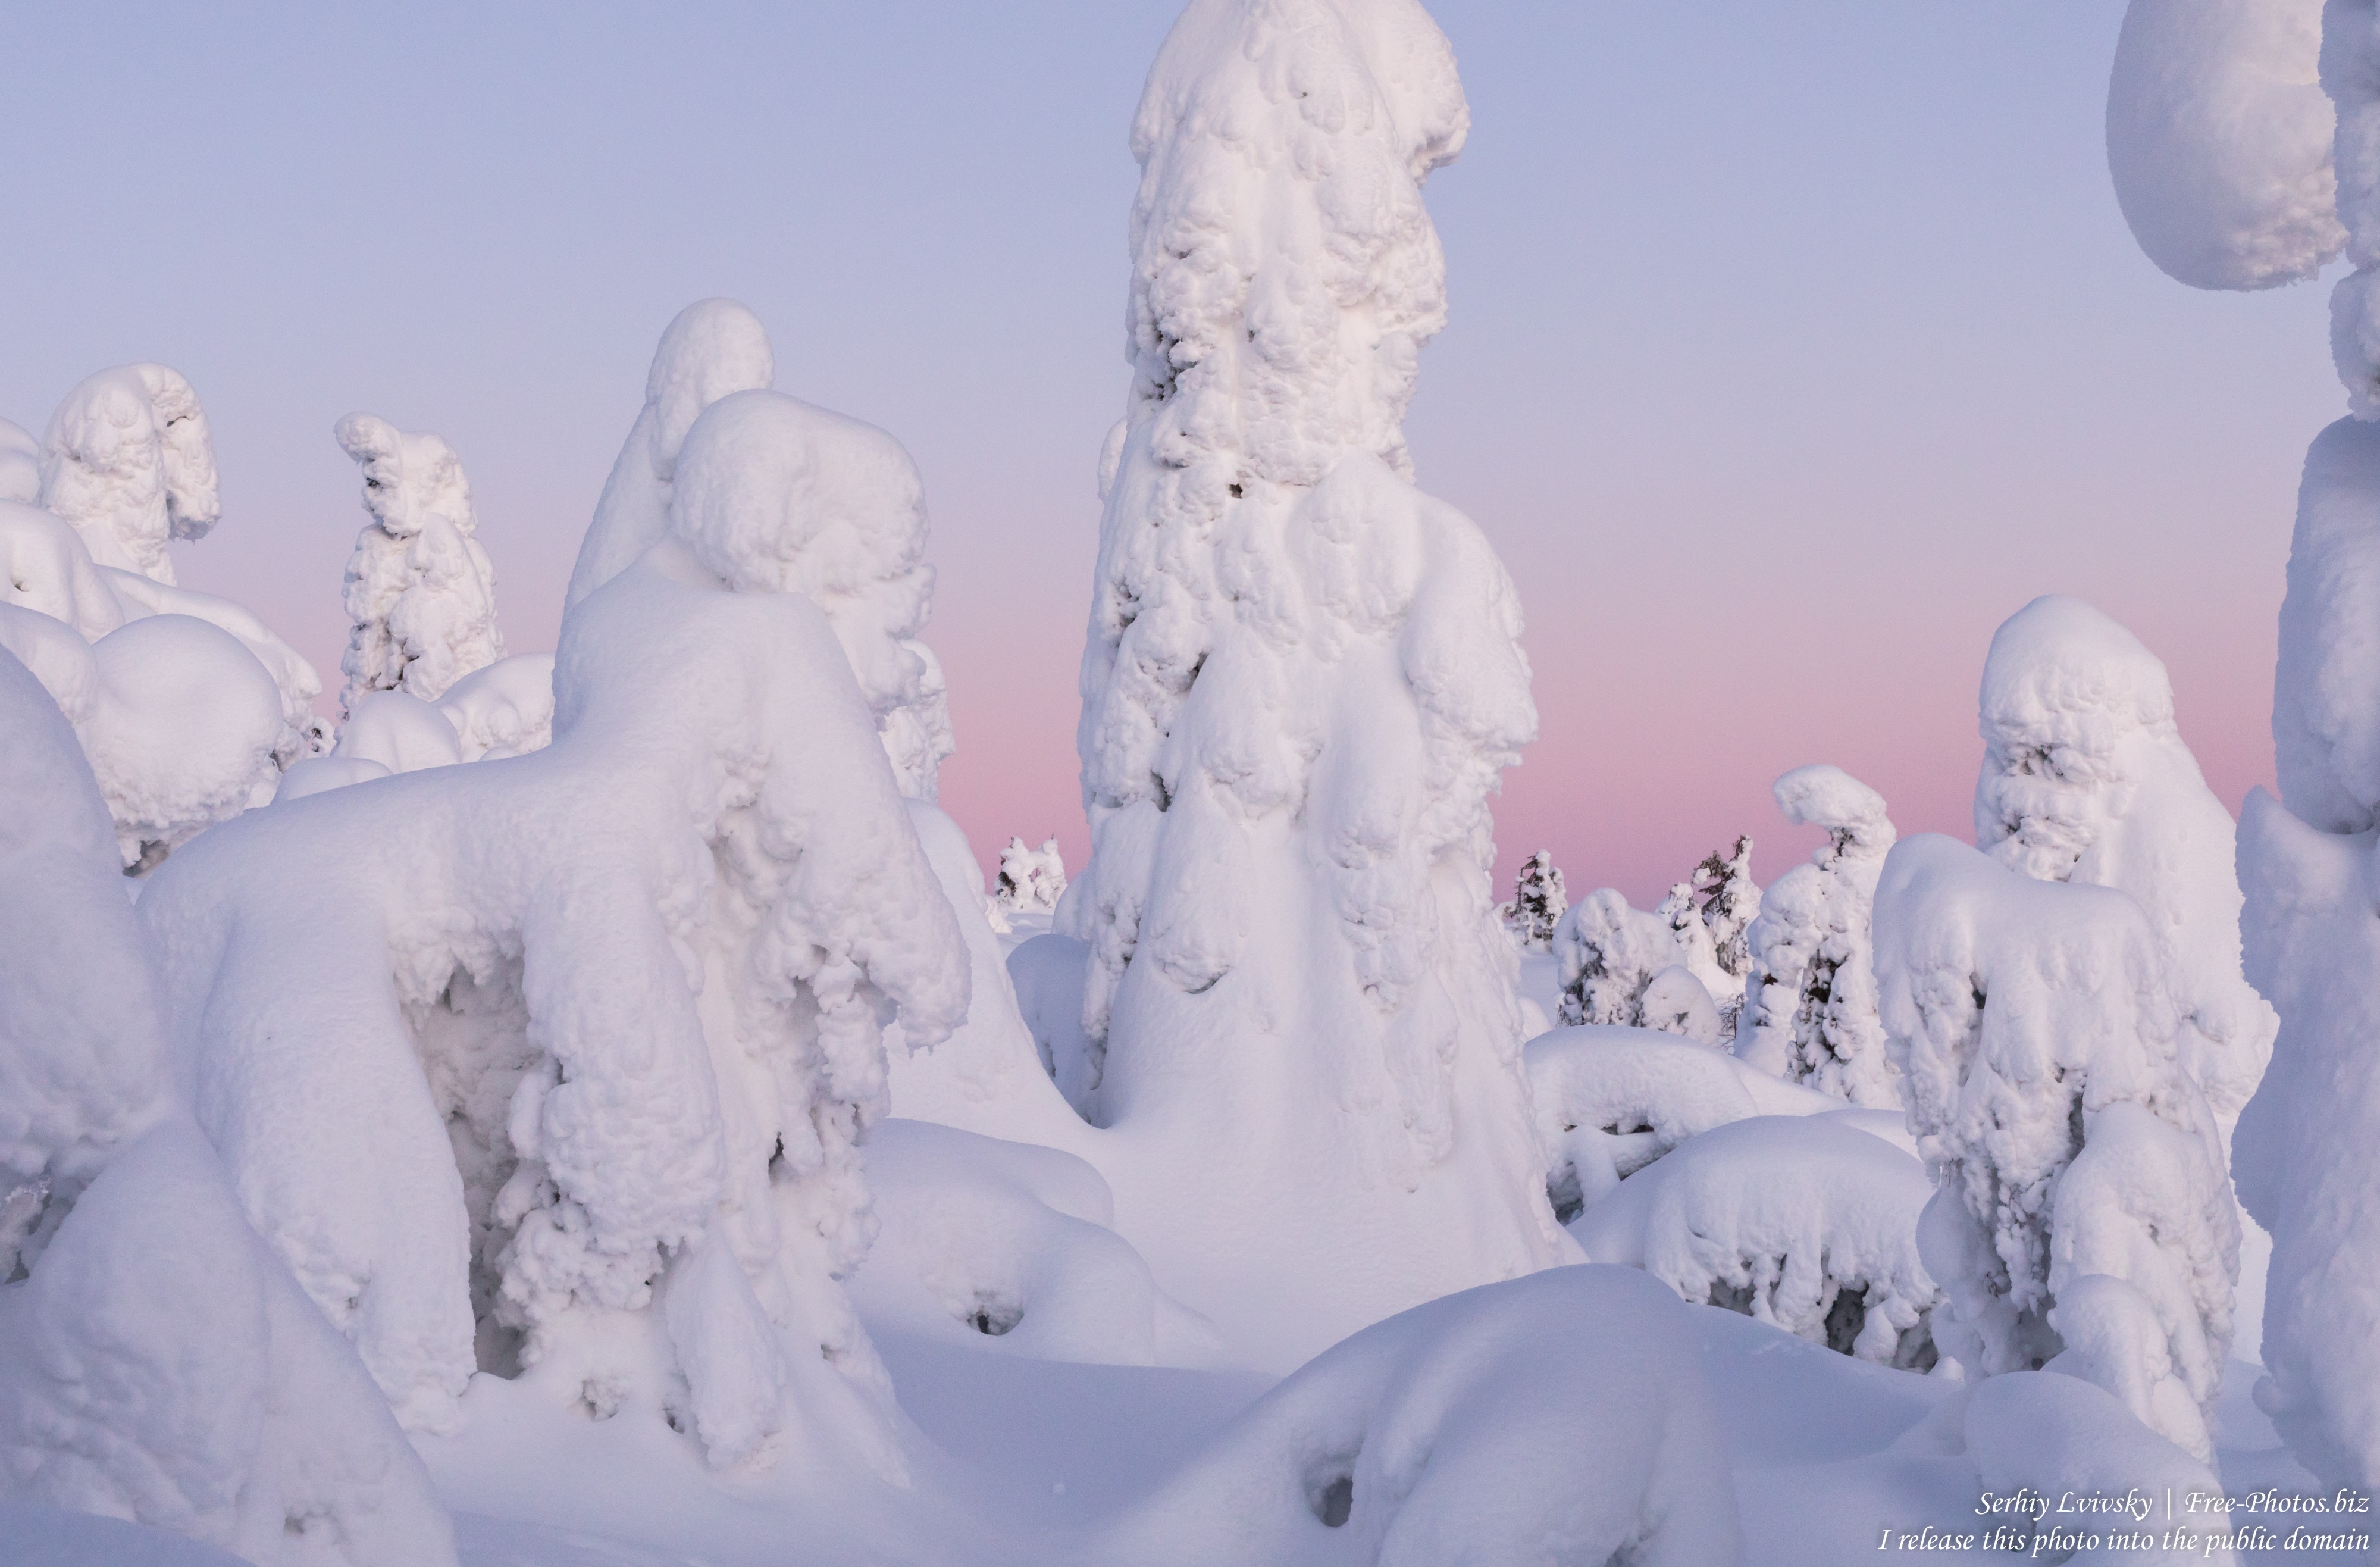 Valtavaara, Finland, photographed in January 2020 by Serhiy Lvivsky, picture 6